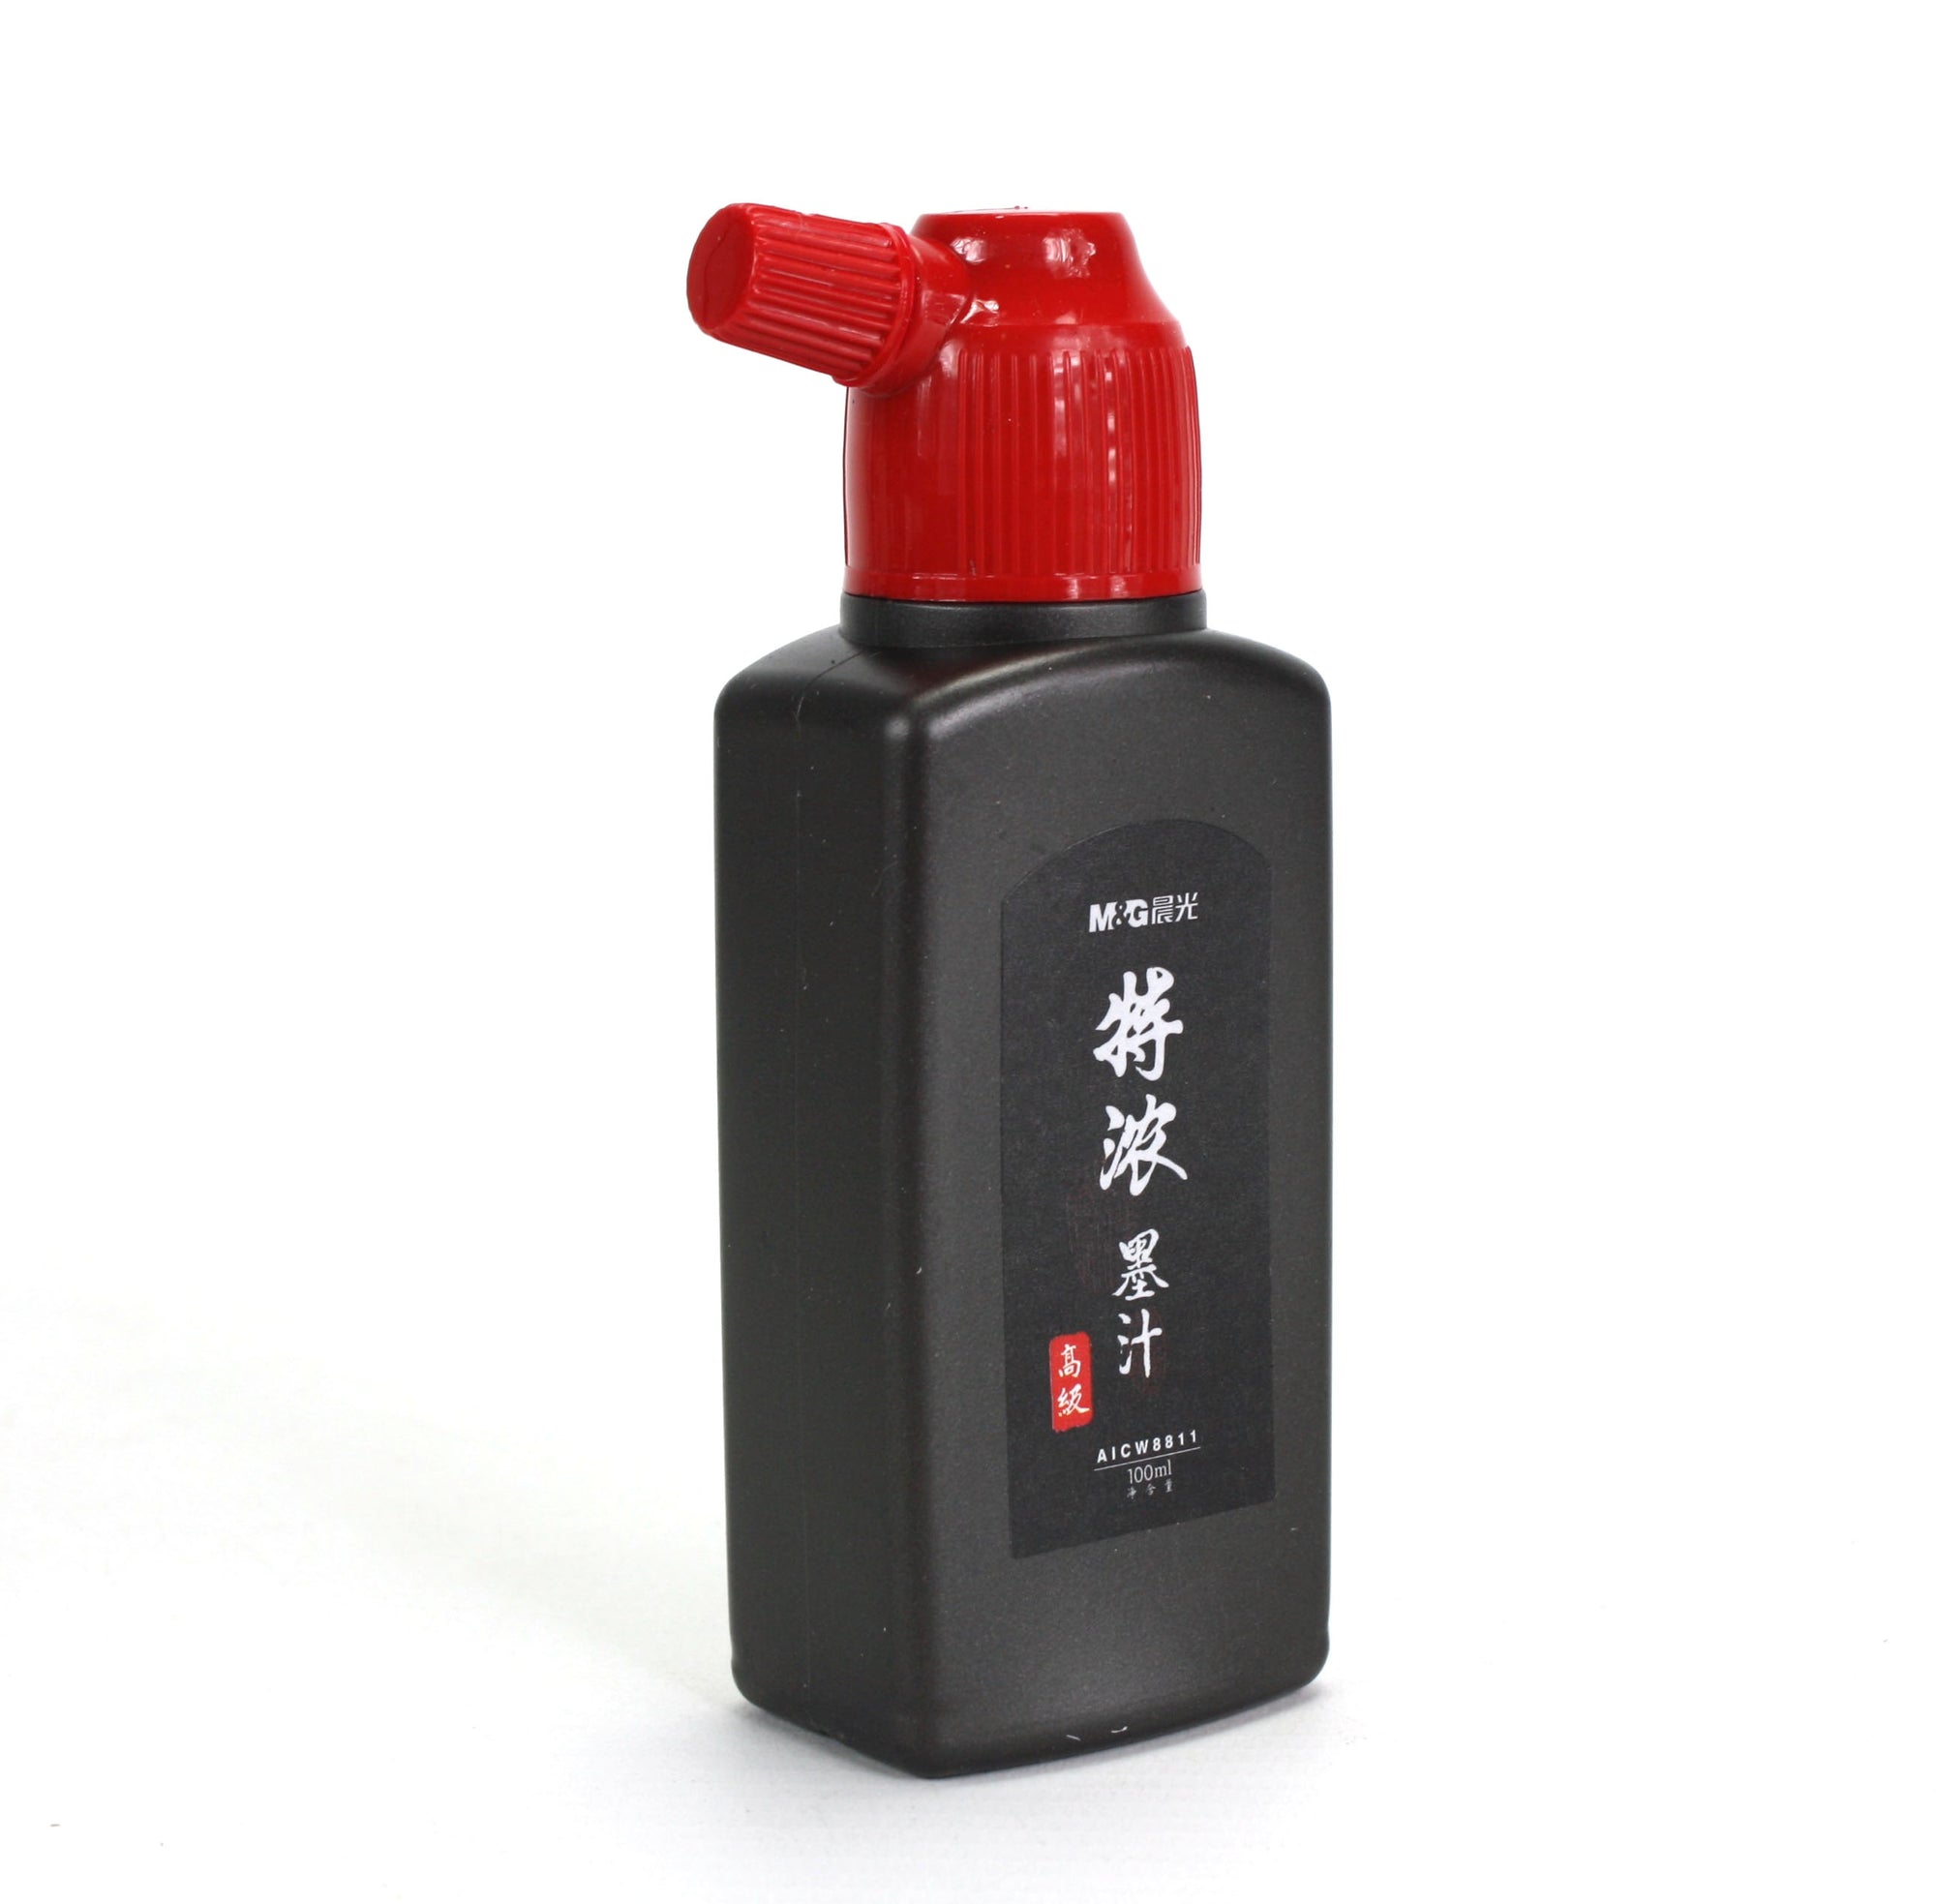 Chinese sumi-e Calligraphy Drawing Ink, Black, AICW8811, from M&G - farangshop-co